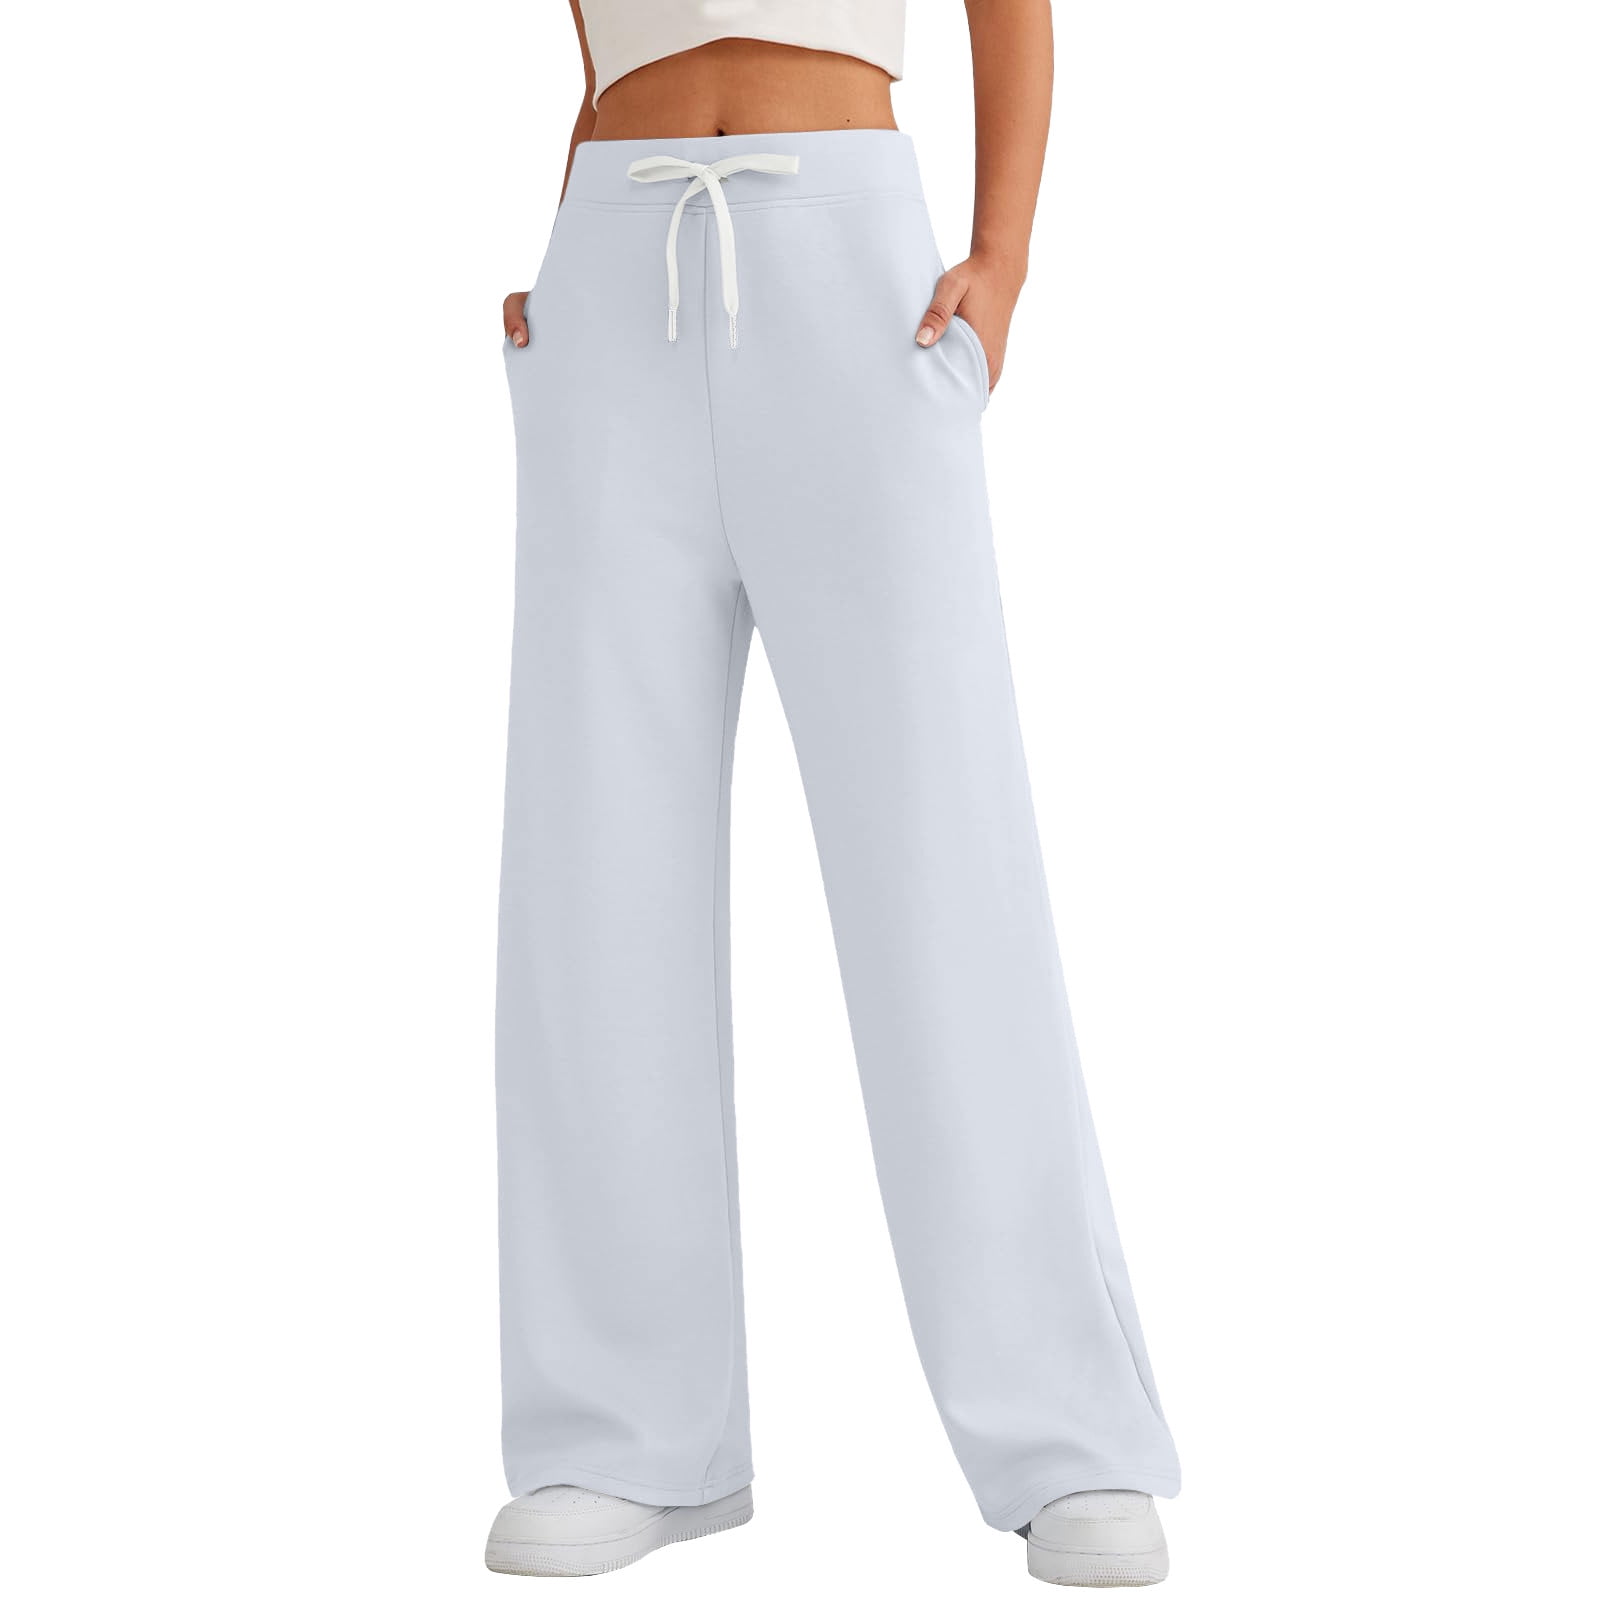 Track Pants  Cute sweatpants outfit, Retro outfits, Cute casual outfits